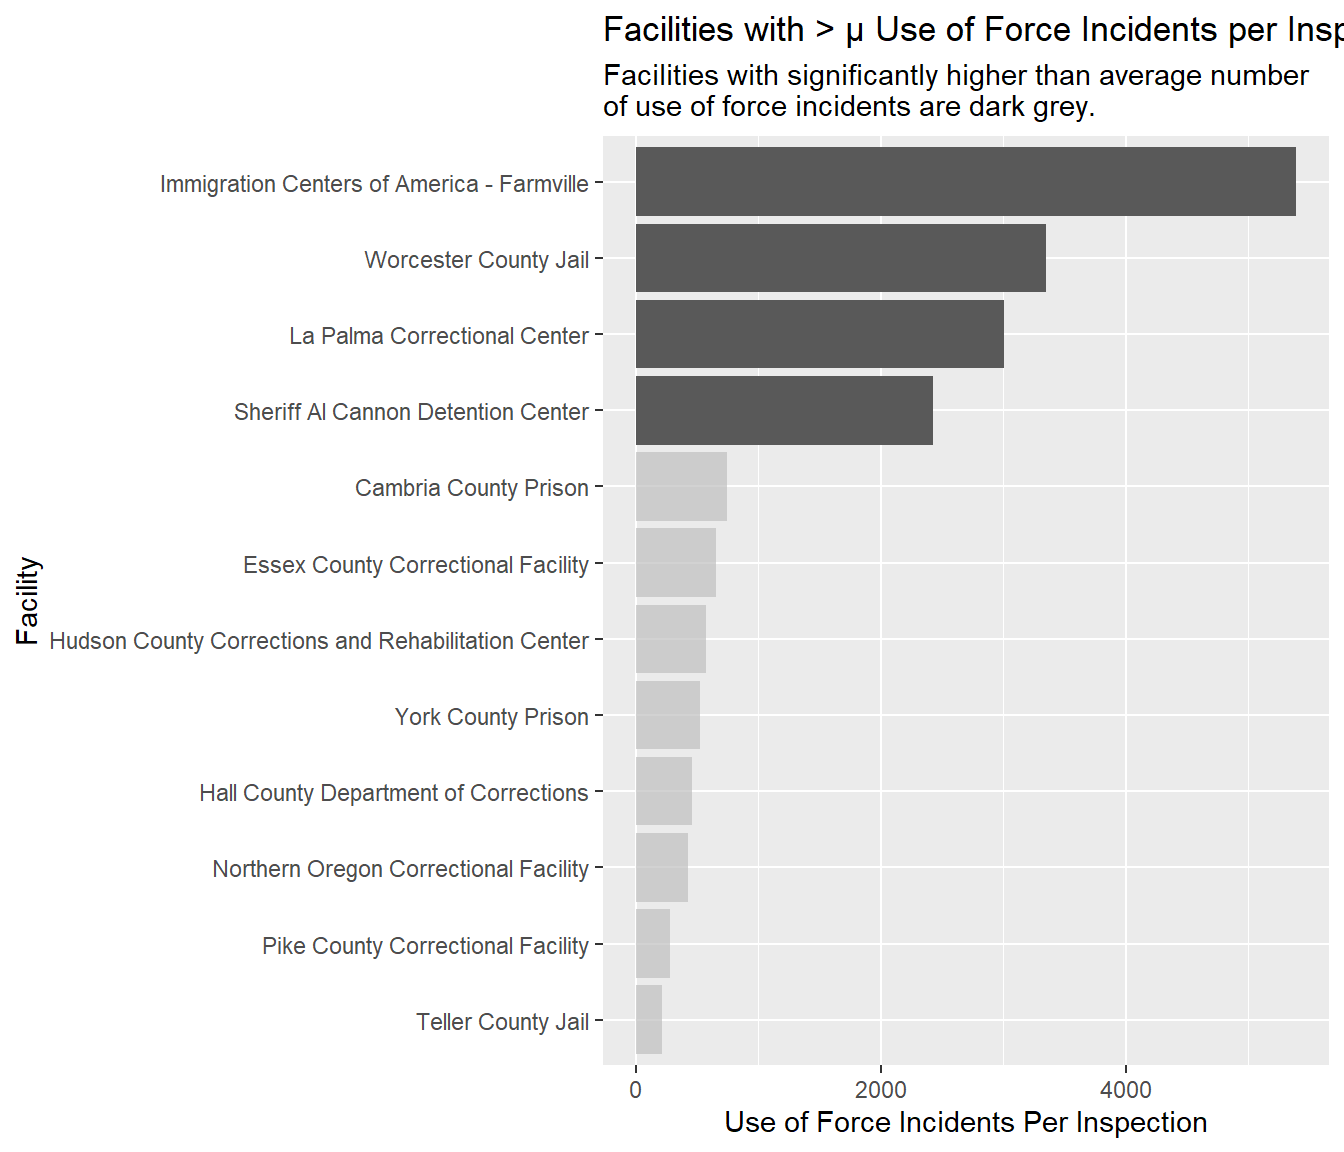 Bar plot of facilities with greater than average number of use of force incidents reported per inspection.